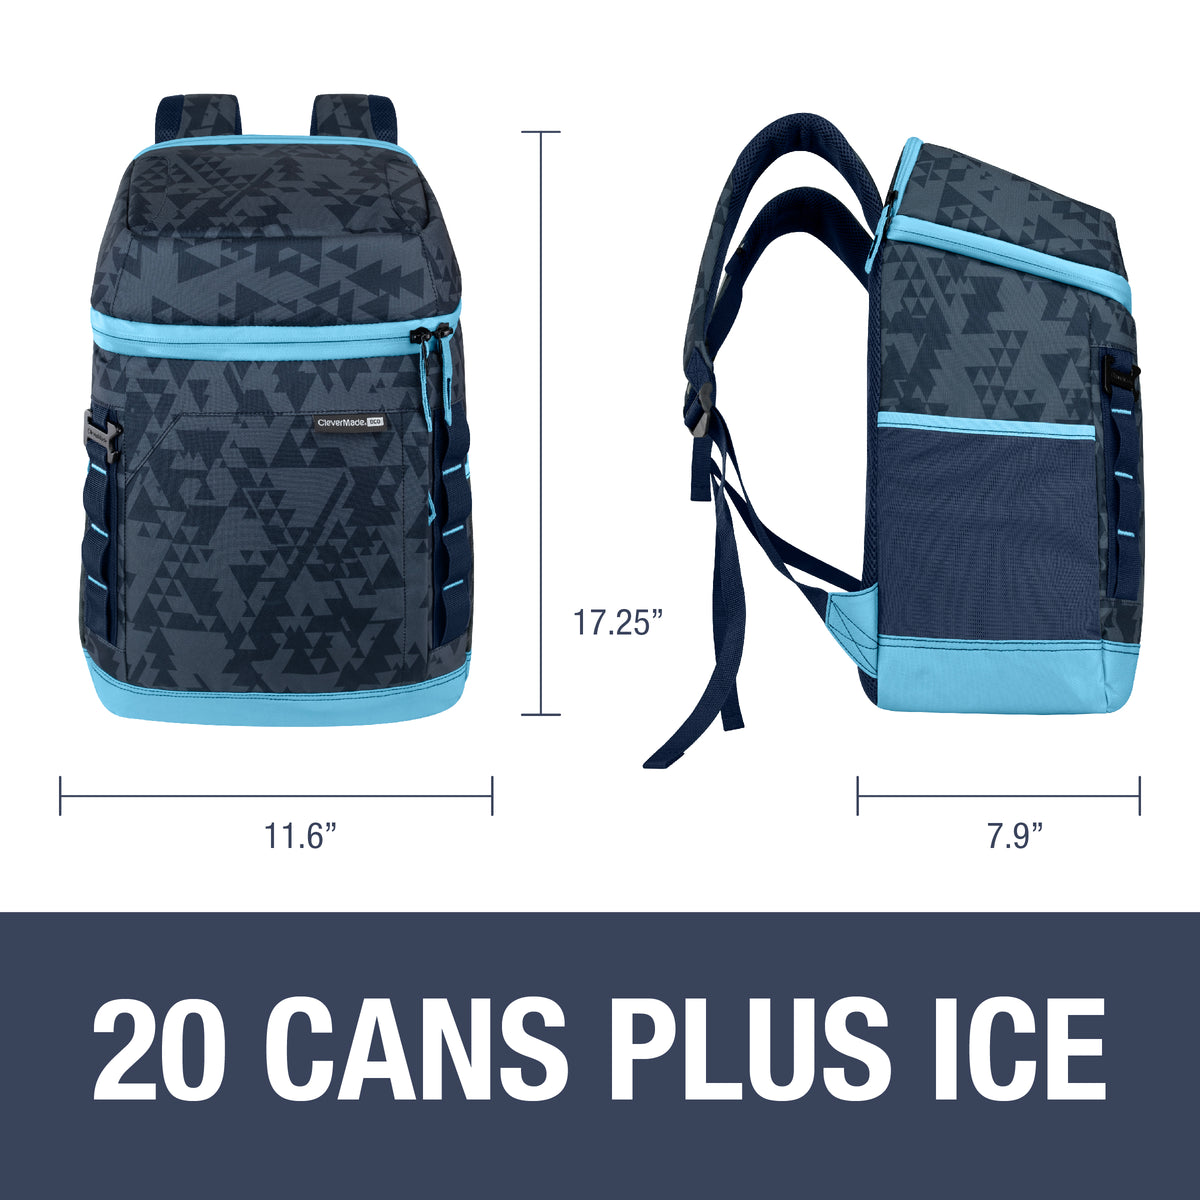 Large insulated cooler bag, 24 can capacity - Blue. Colour: blue